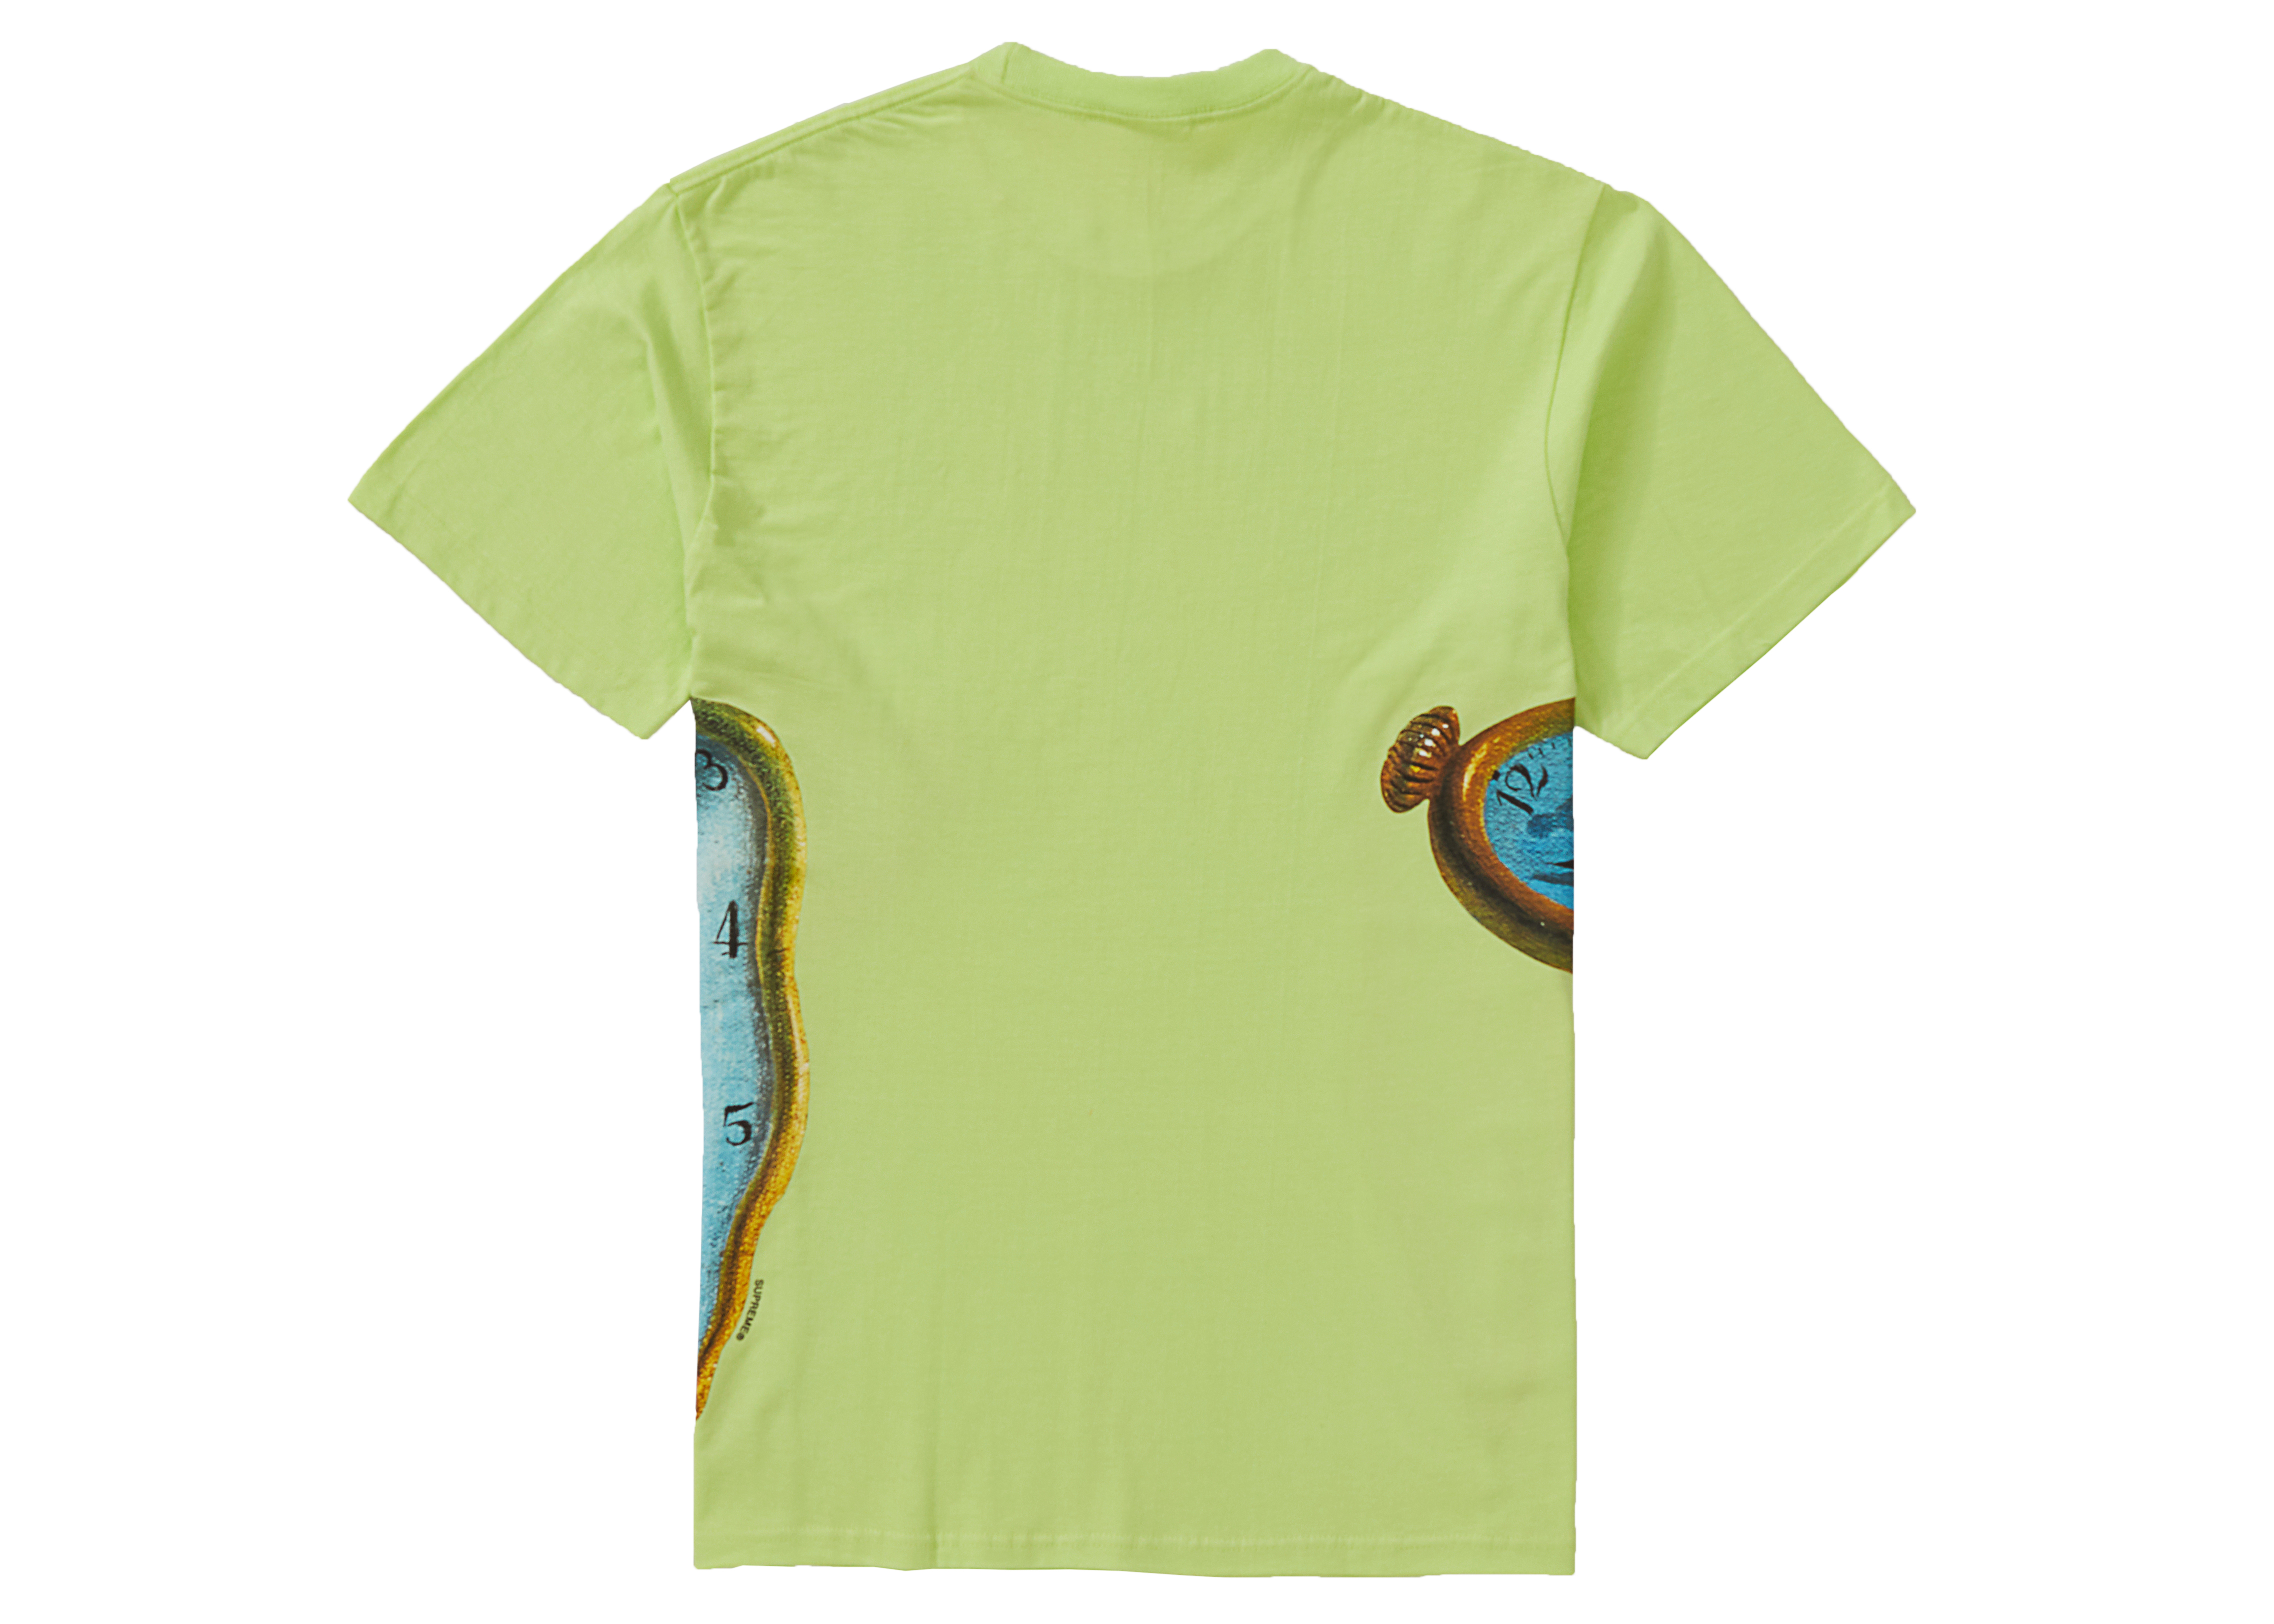 Supreme The Persistence Of Memory Tee Neon Green